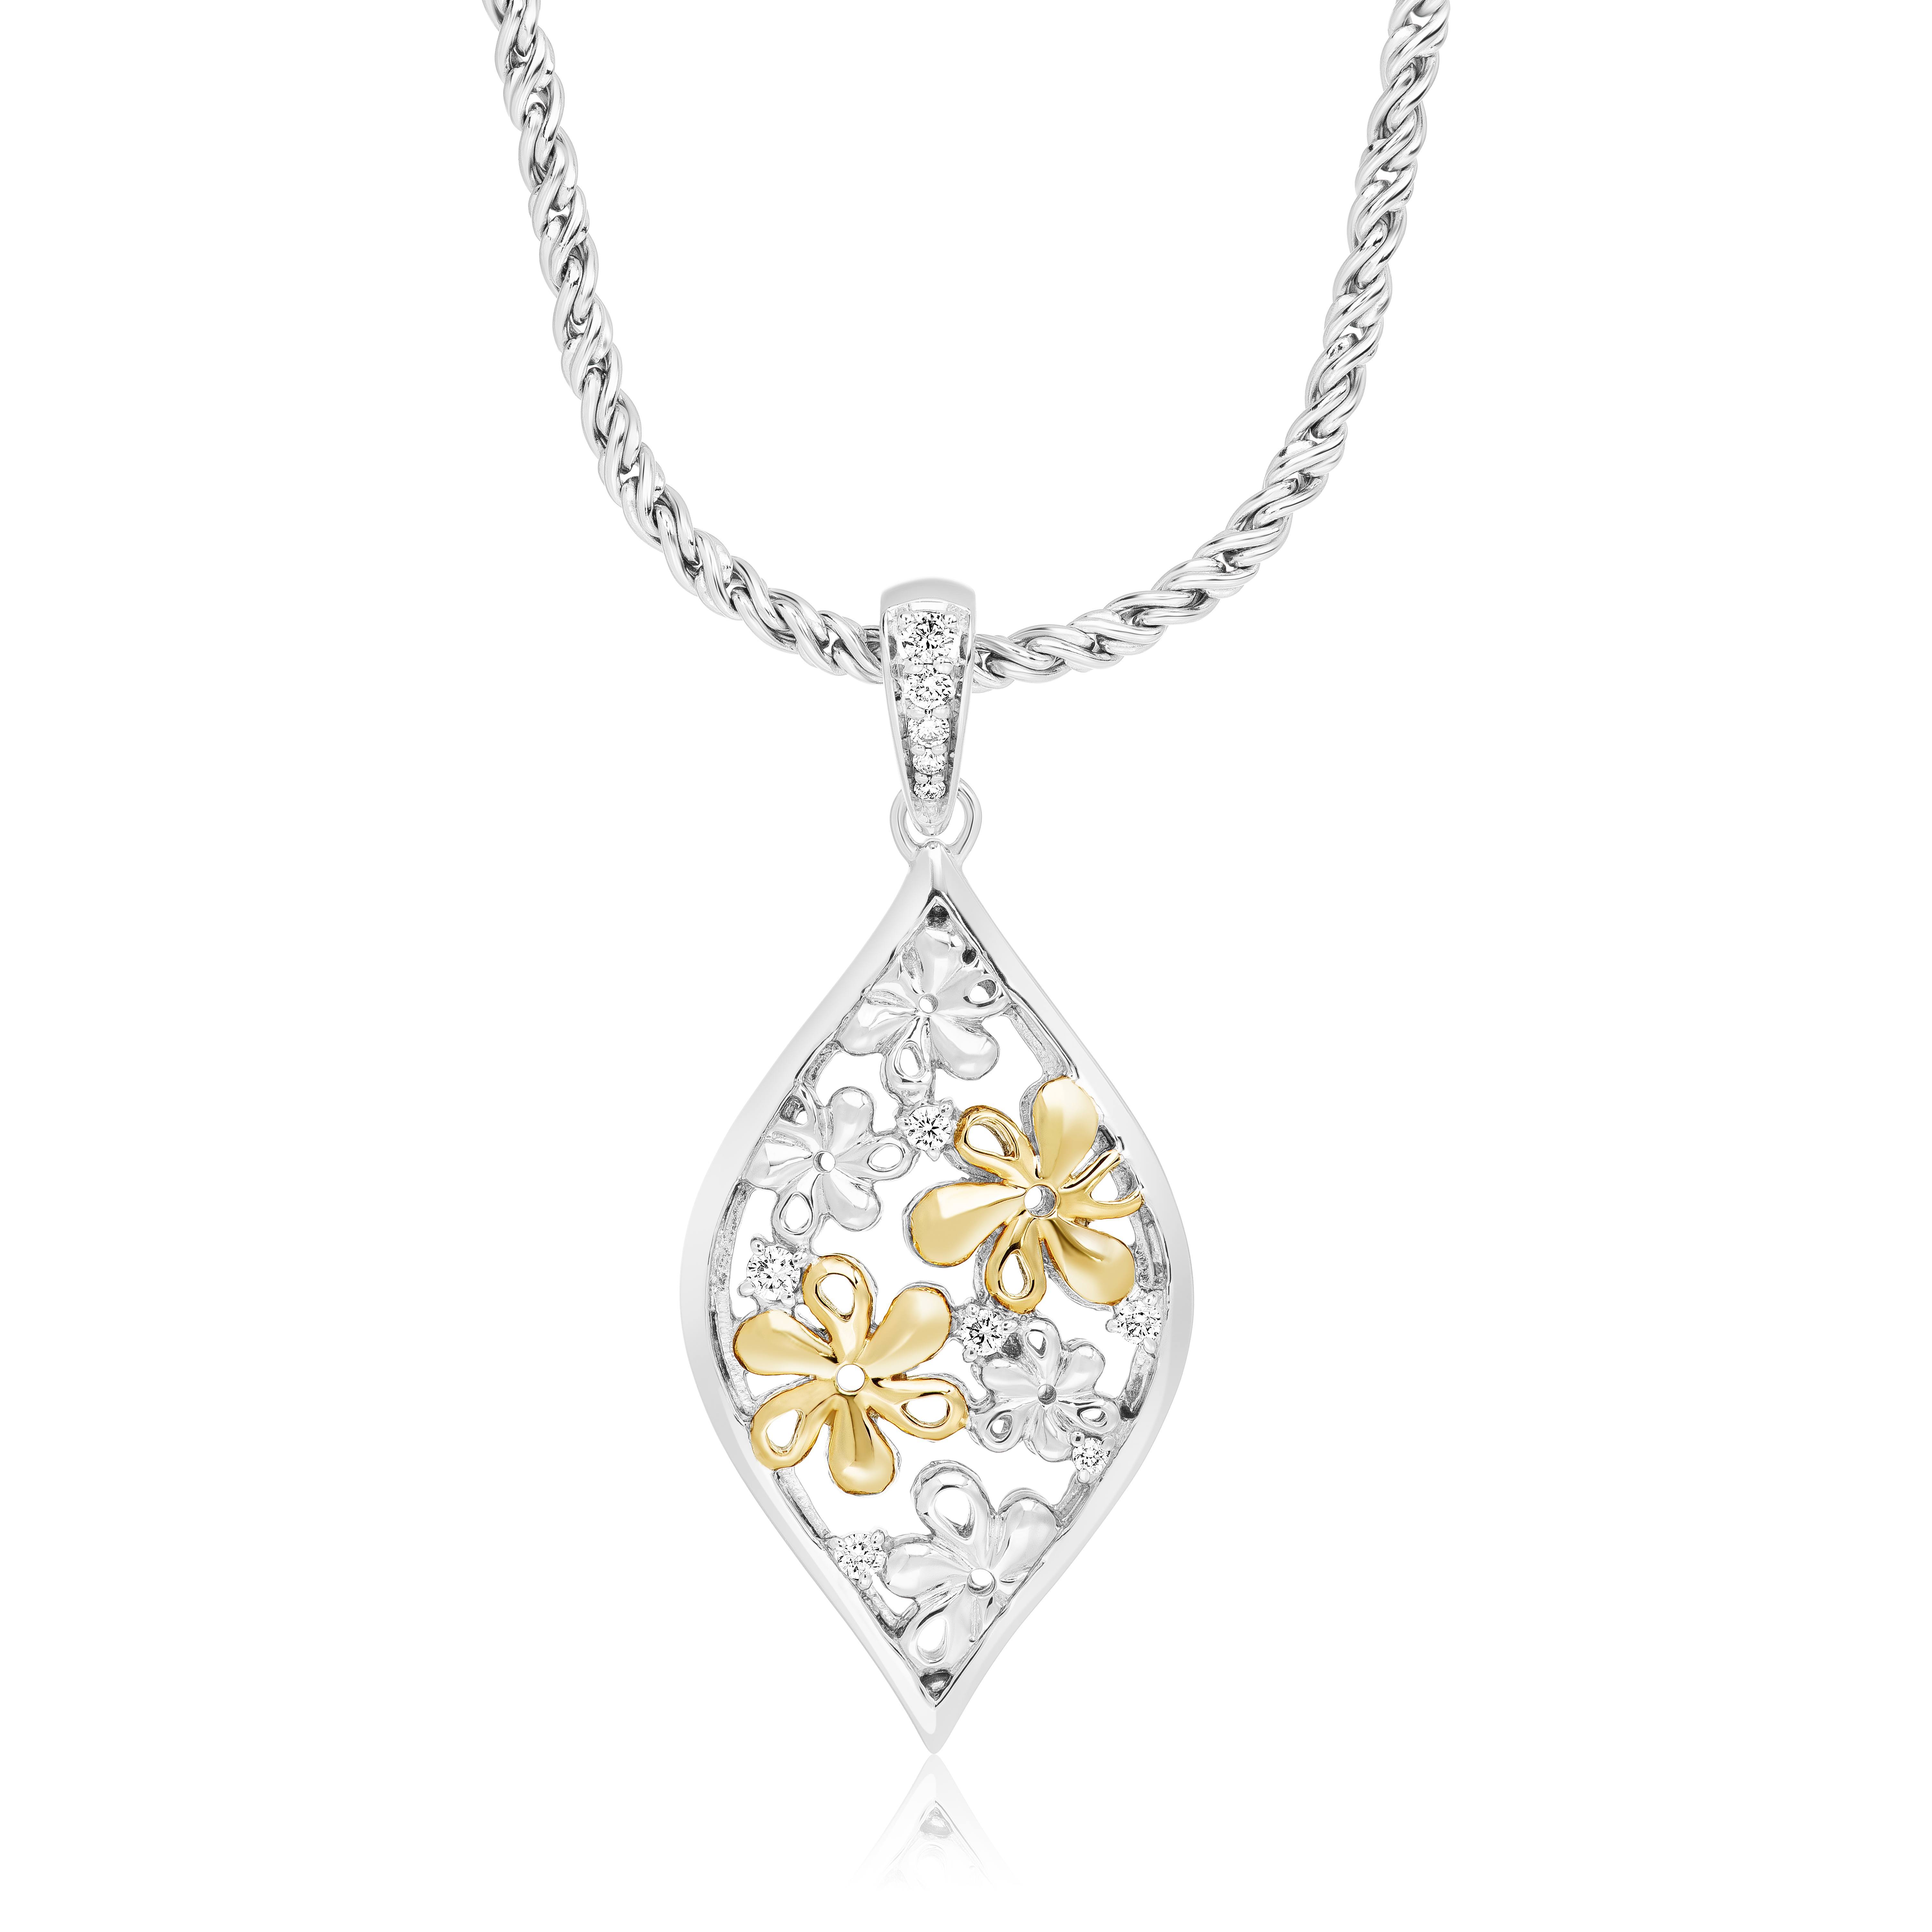 Silver and Gold Floral Pendant